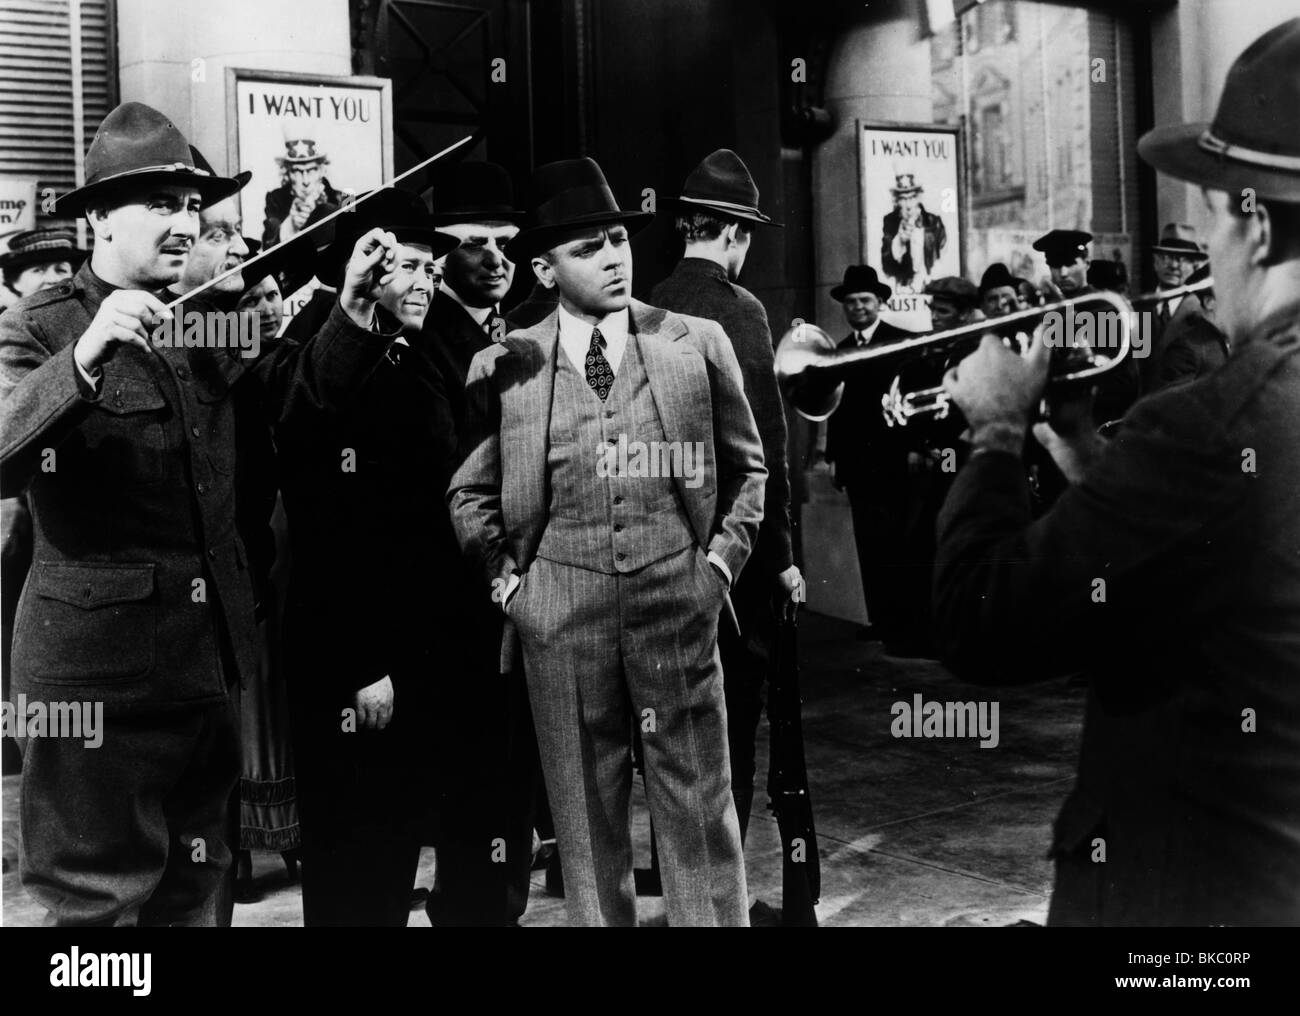 YANKEE DOODLE DANDY(1942) JAMES CAGNEY YDD 005P Stock Photo